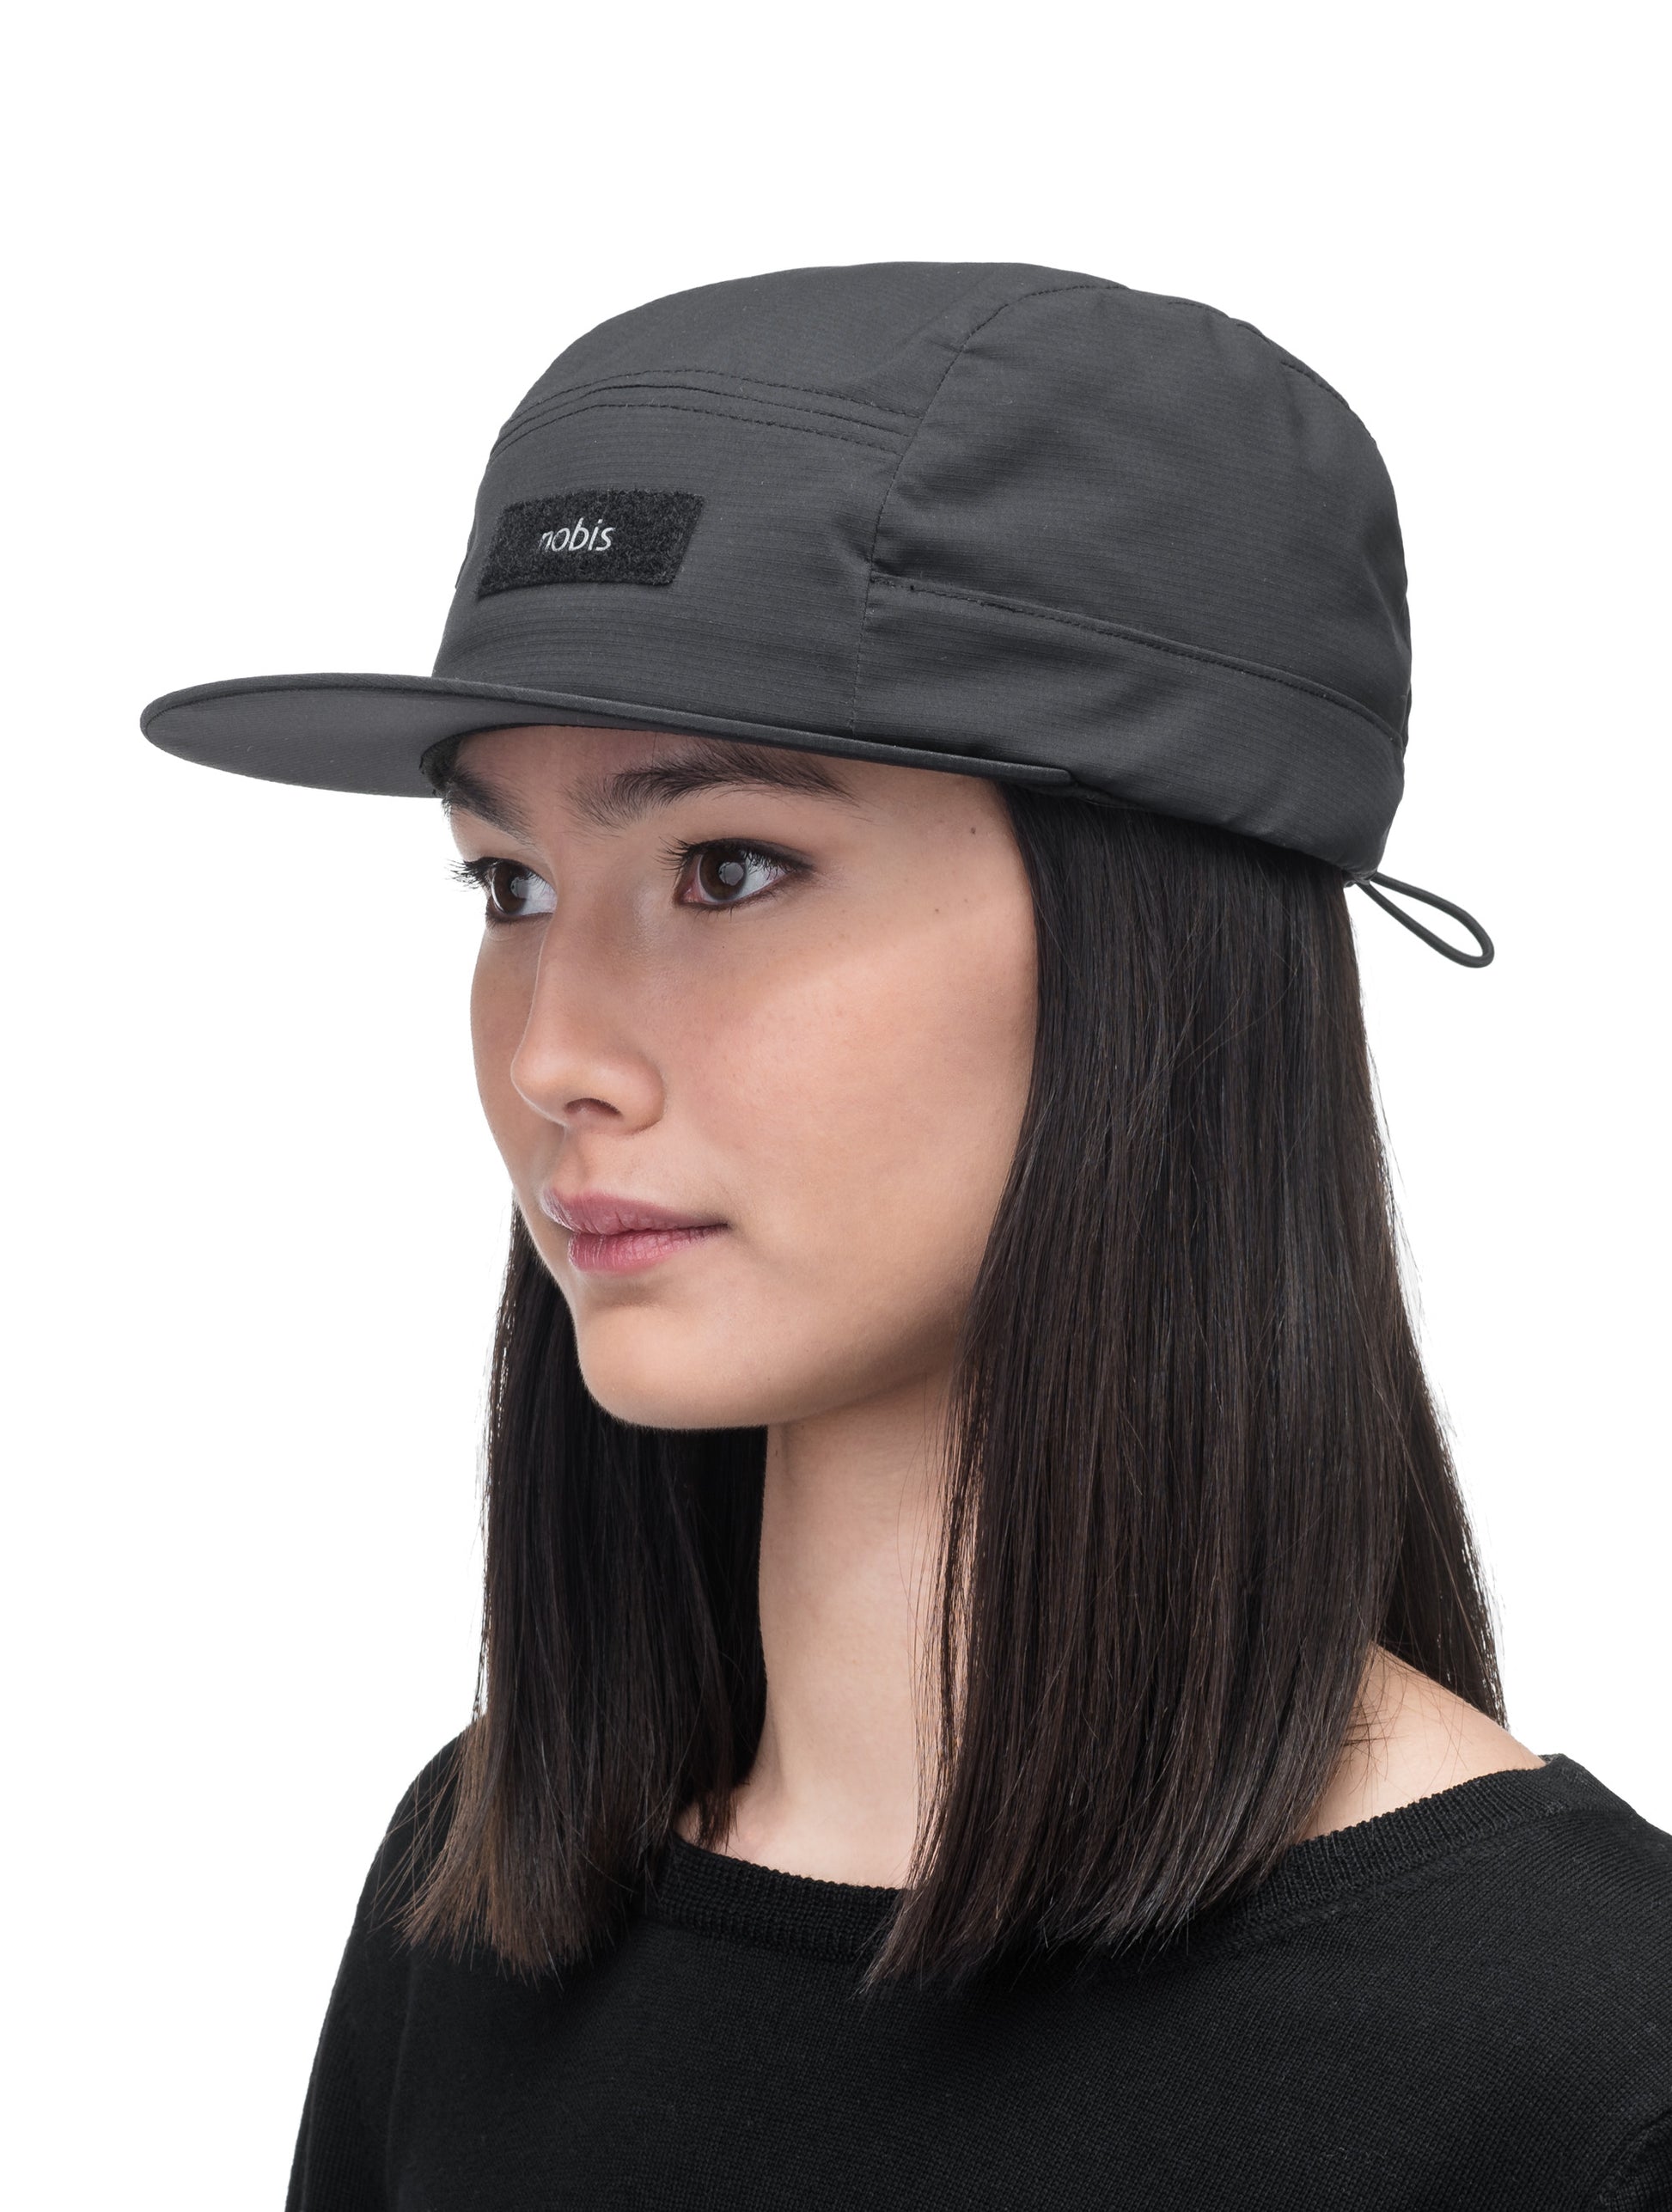 Myce Unisex Insulated Racer Cap with low unstructured crown, flat peak brim, and adjustable toggle back, in Black